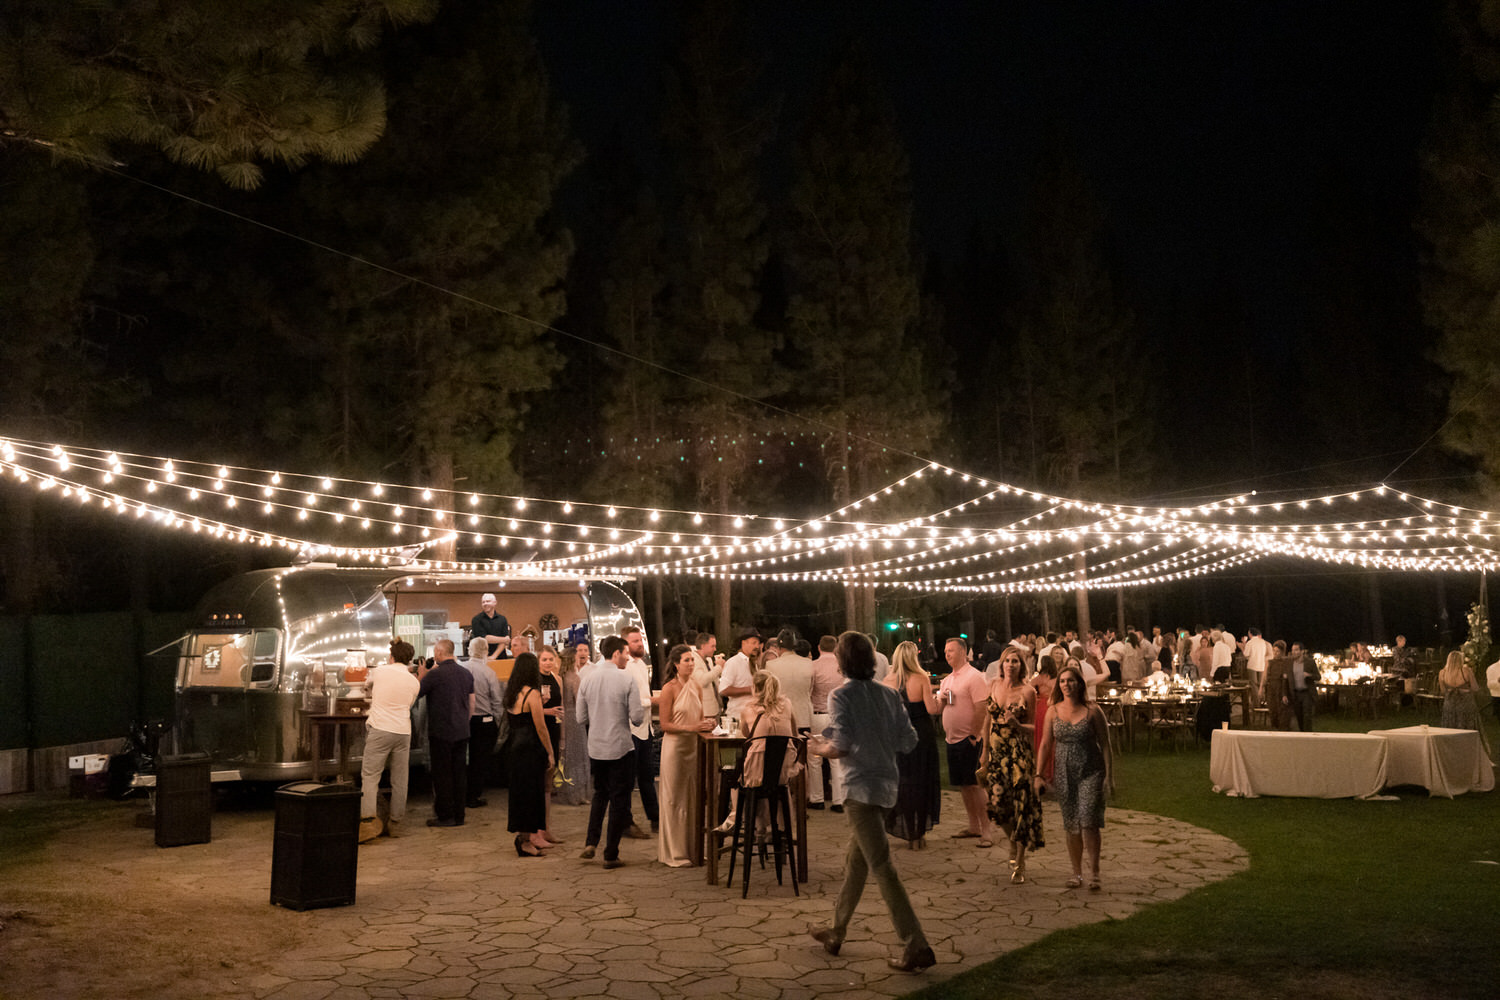 Strings of lights and an Airstream trailer decorate an outdoor wedding reception among the pine trees at Chalet View Lodge.